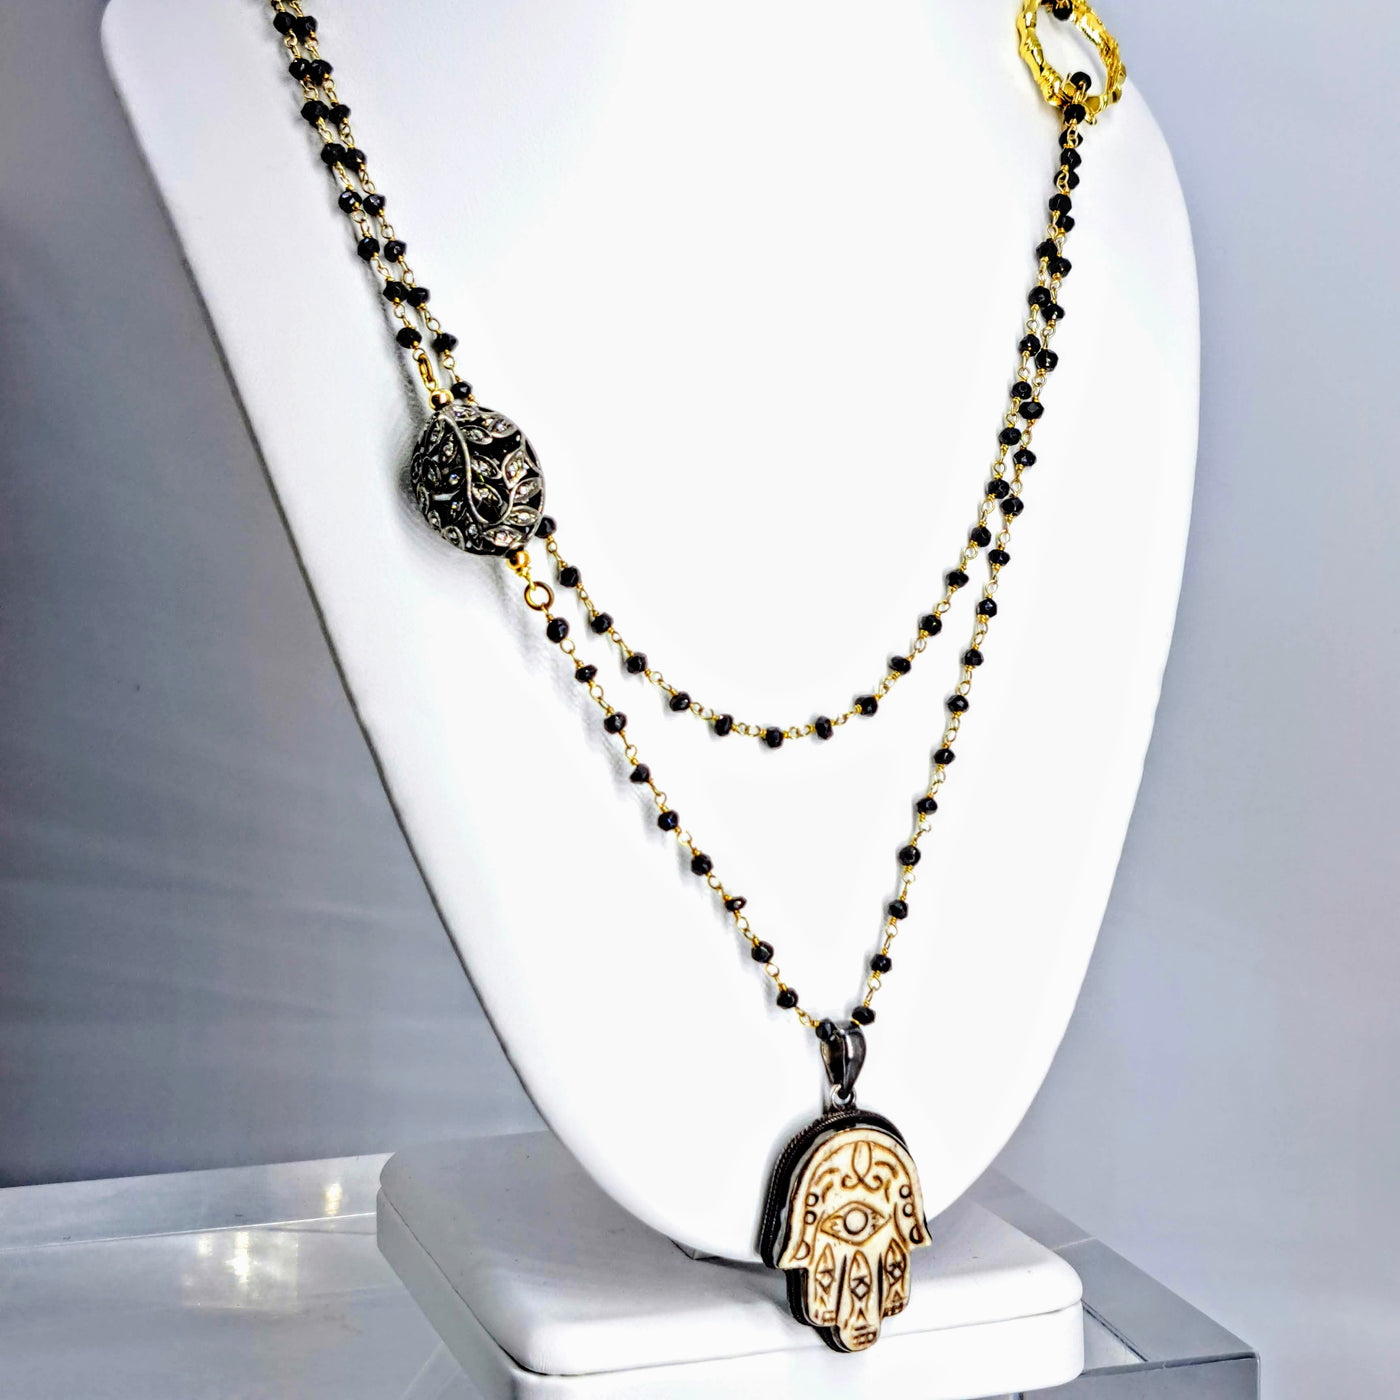 "Garden Of Life" 40" Convertible Necklace - Spinel, Bone, Diamond, Sterling, Gold Sterling